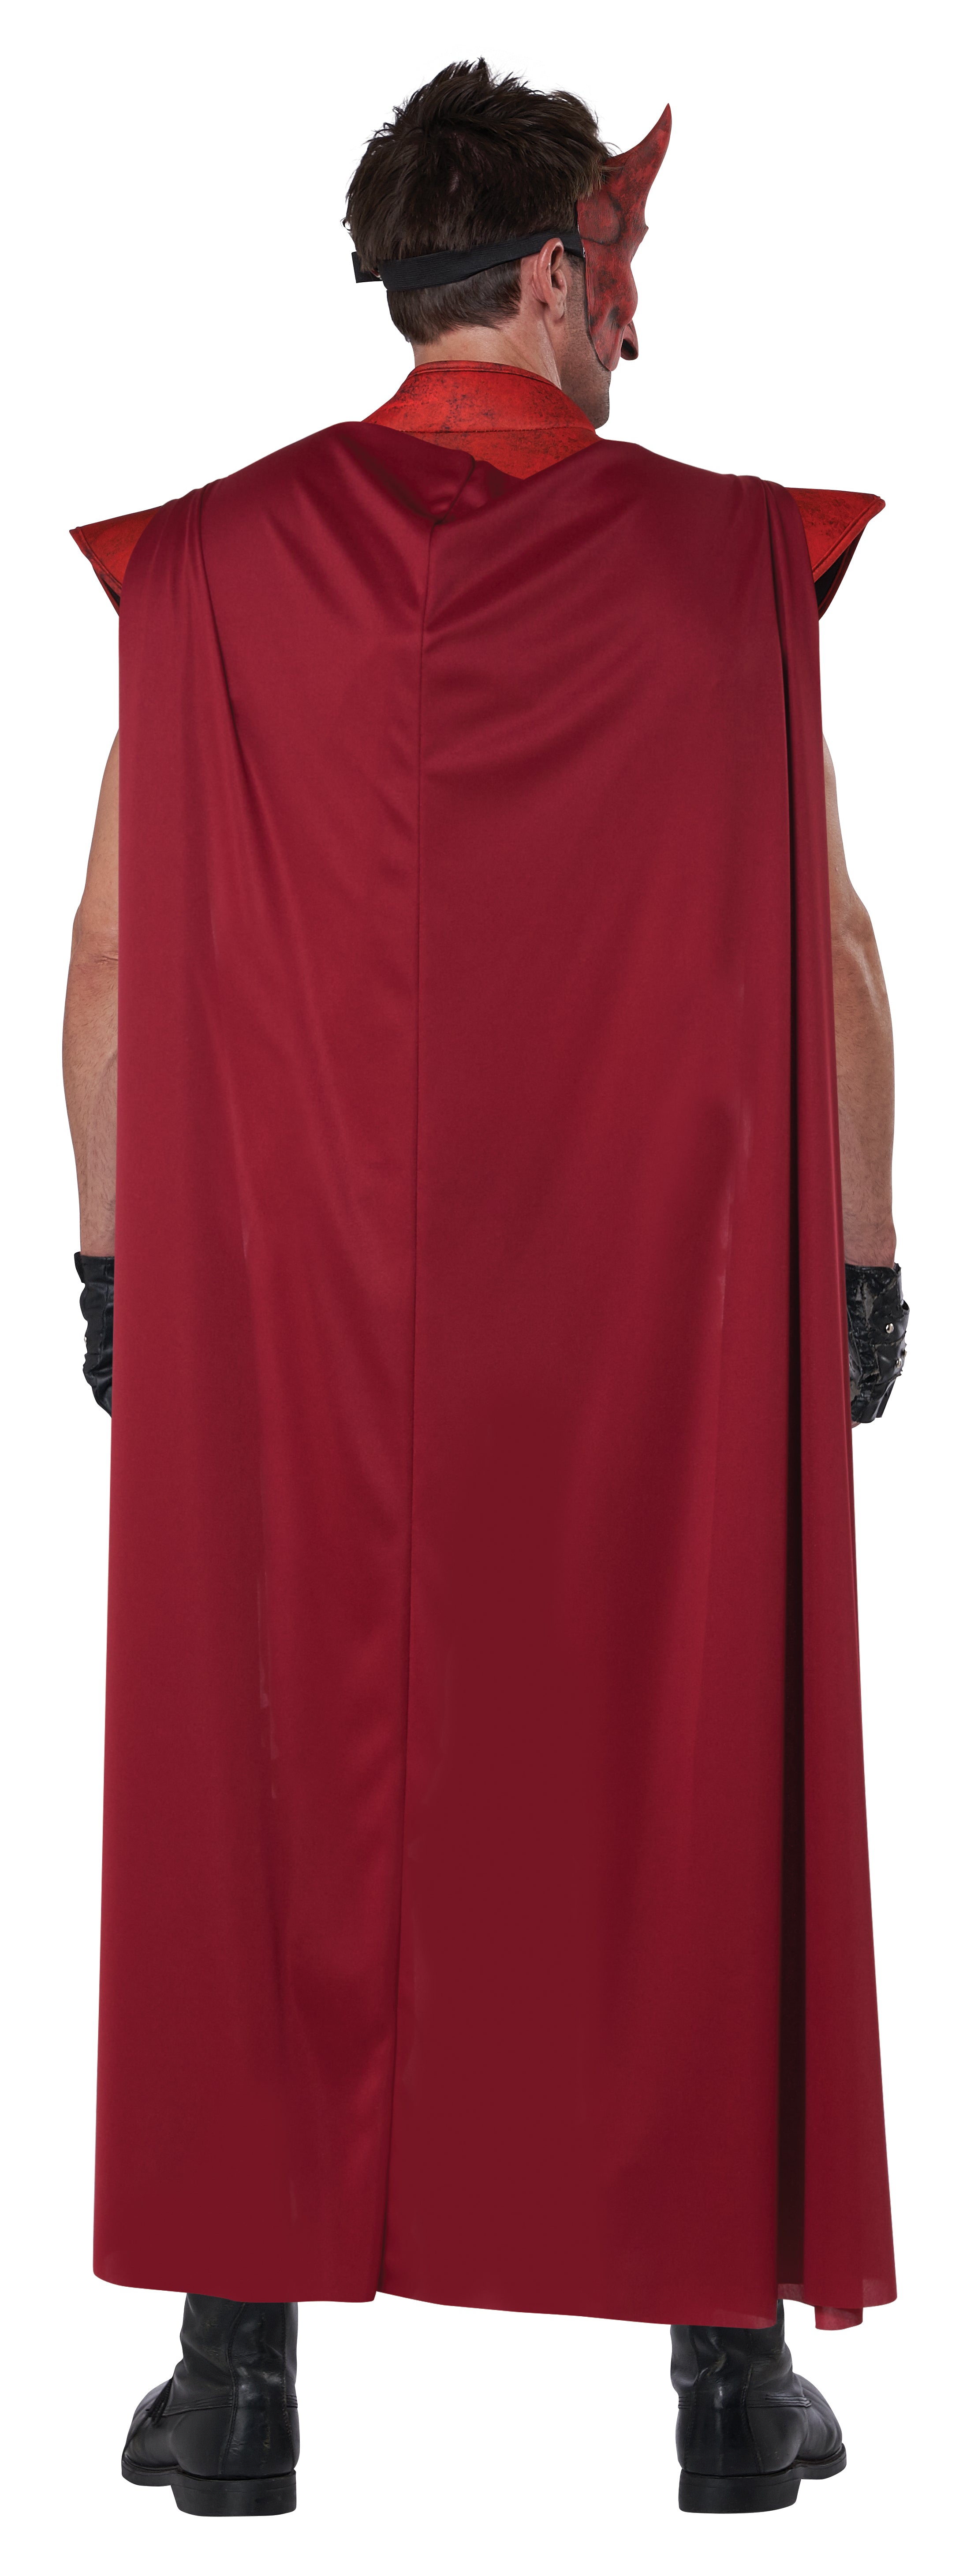 Devilishly Hot As Hell Adult Costume